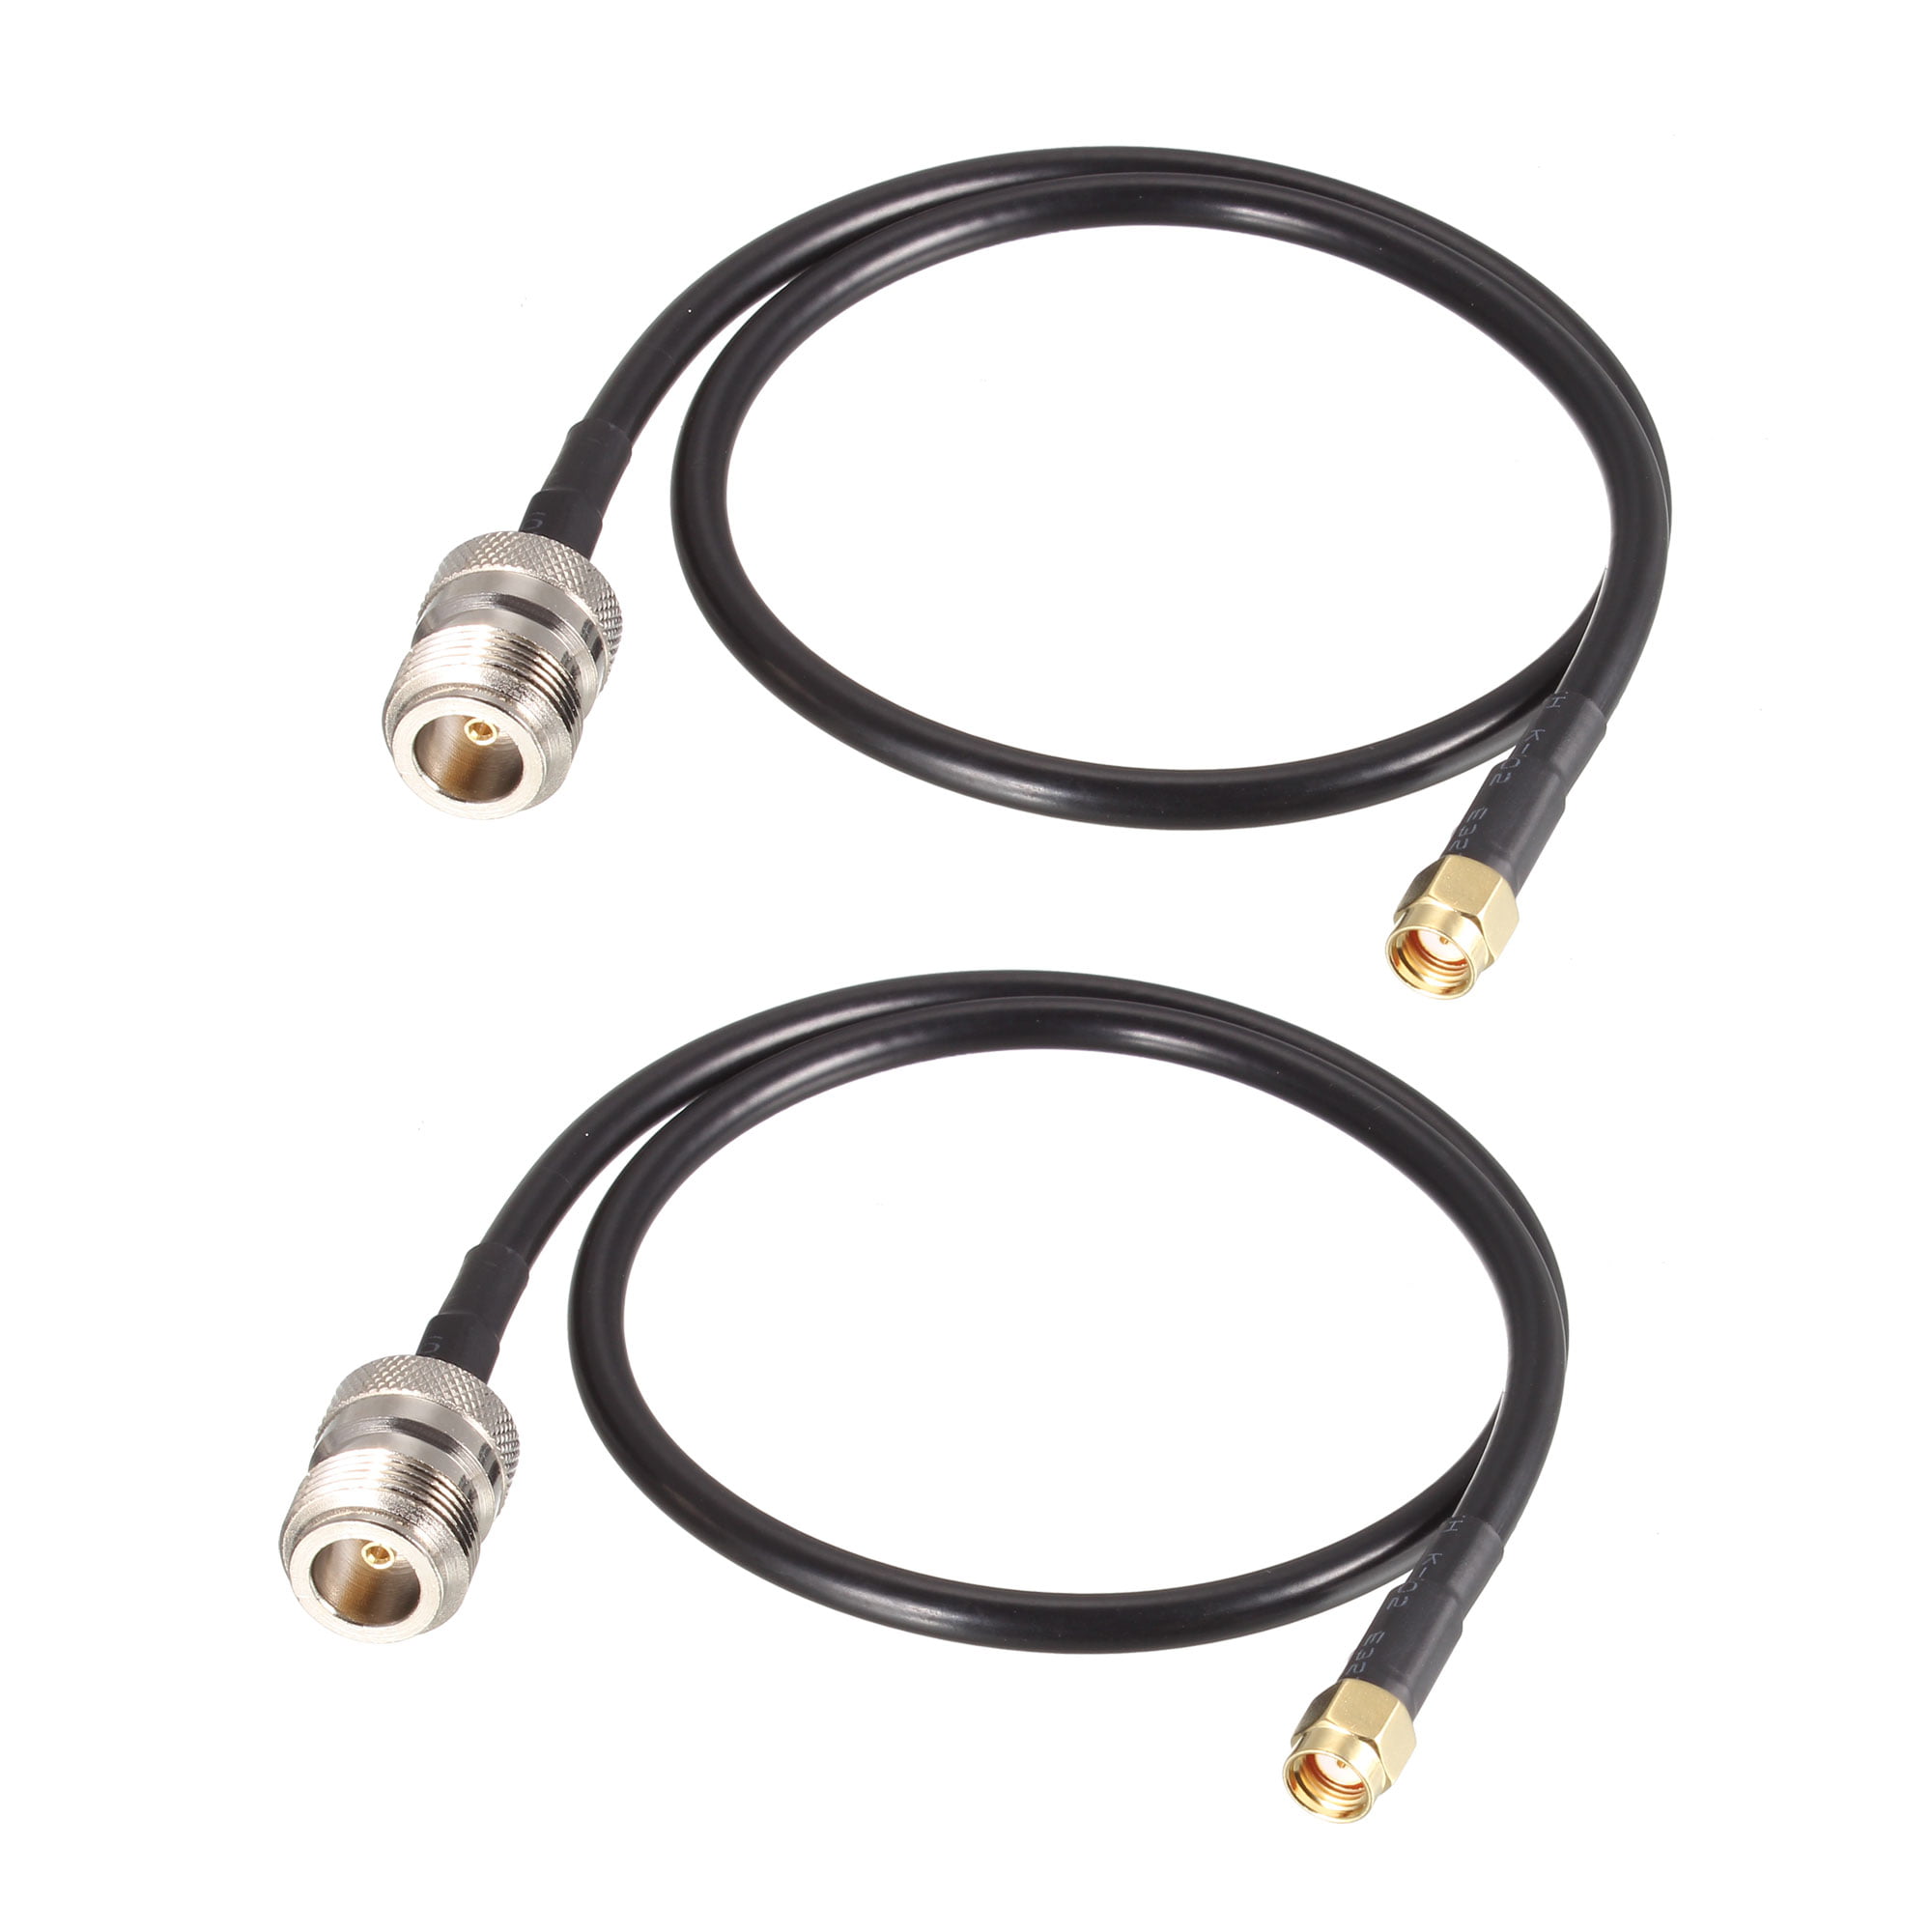 SMA female to TNC male RA angle pigtail cable RG58 50cm for wireless router NEW Good Quality Fast USA Shipping